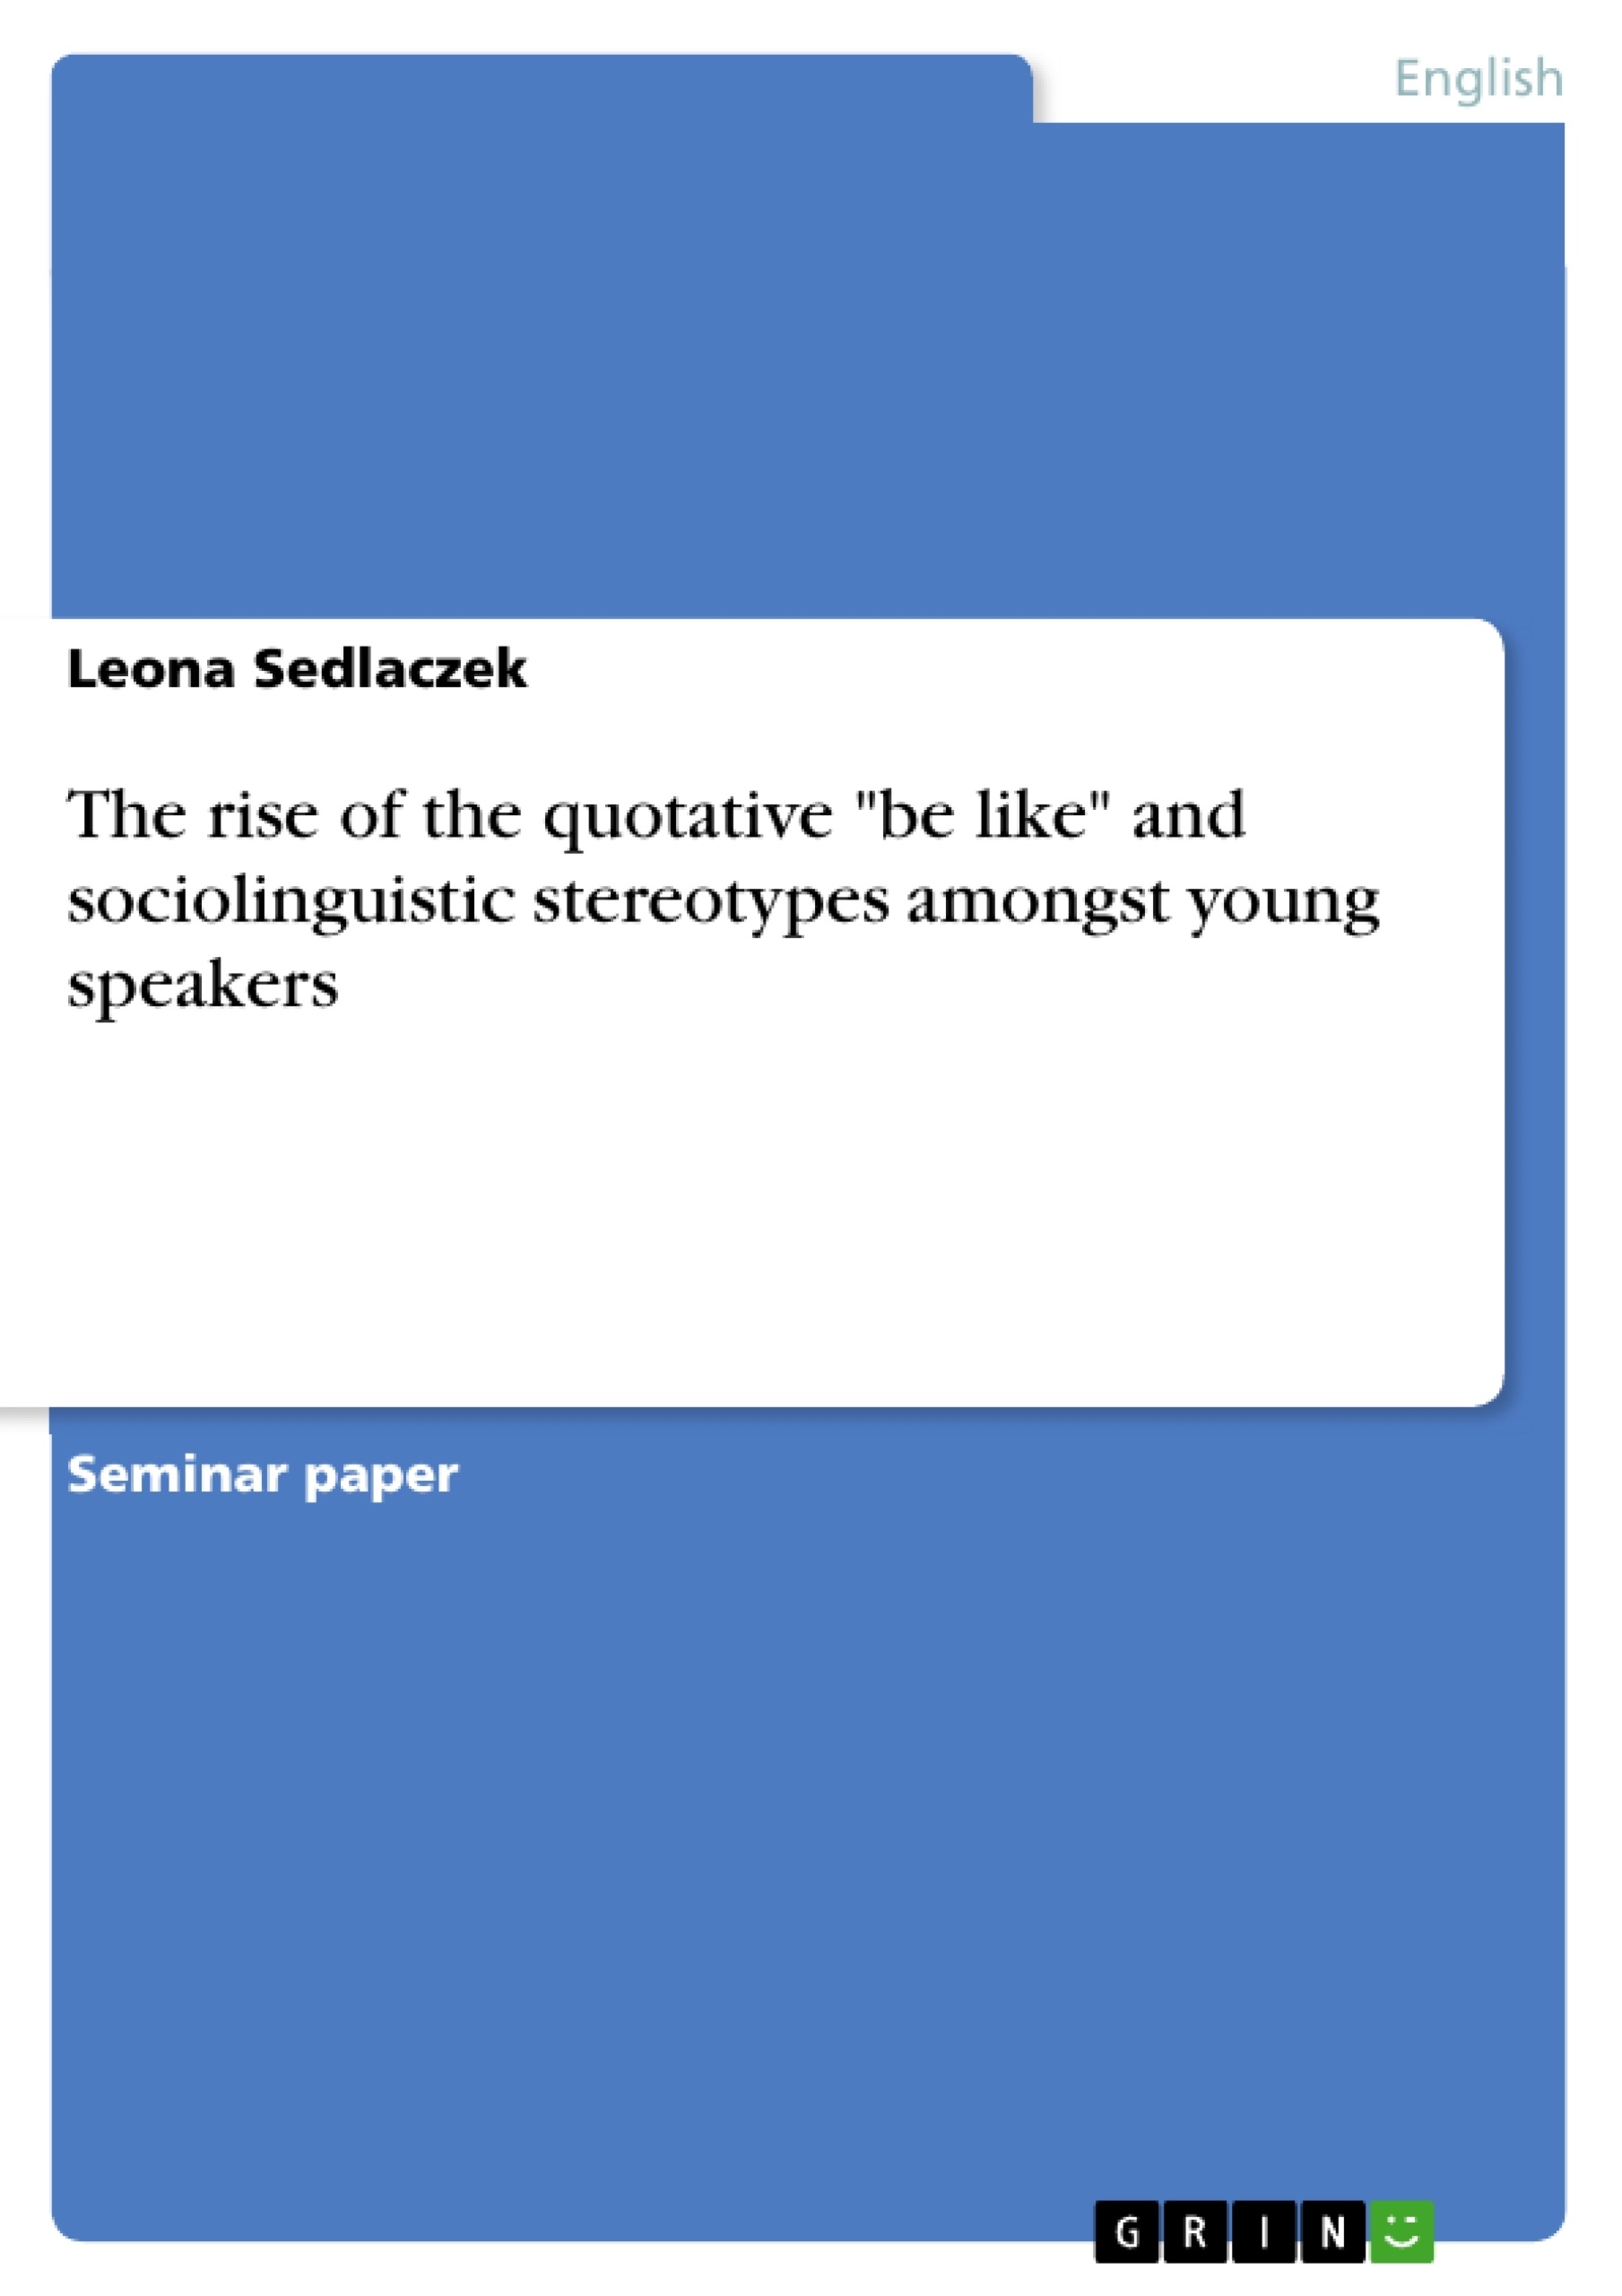 Title: The rise of the quotative "be like" and sociolinguistic stereotypes amongst young speakers